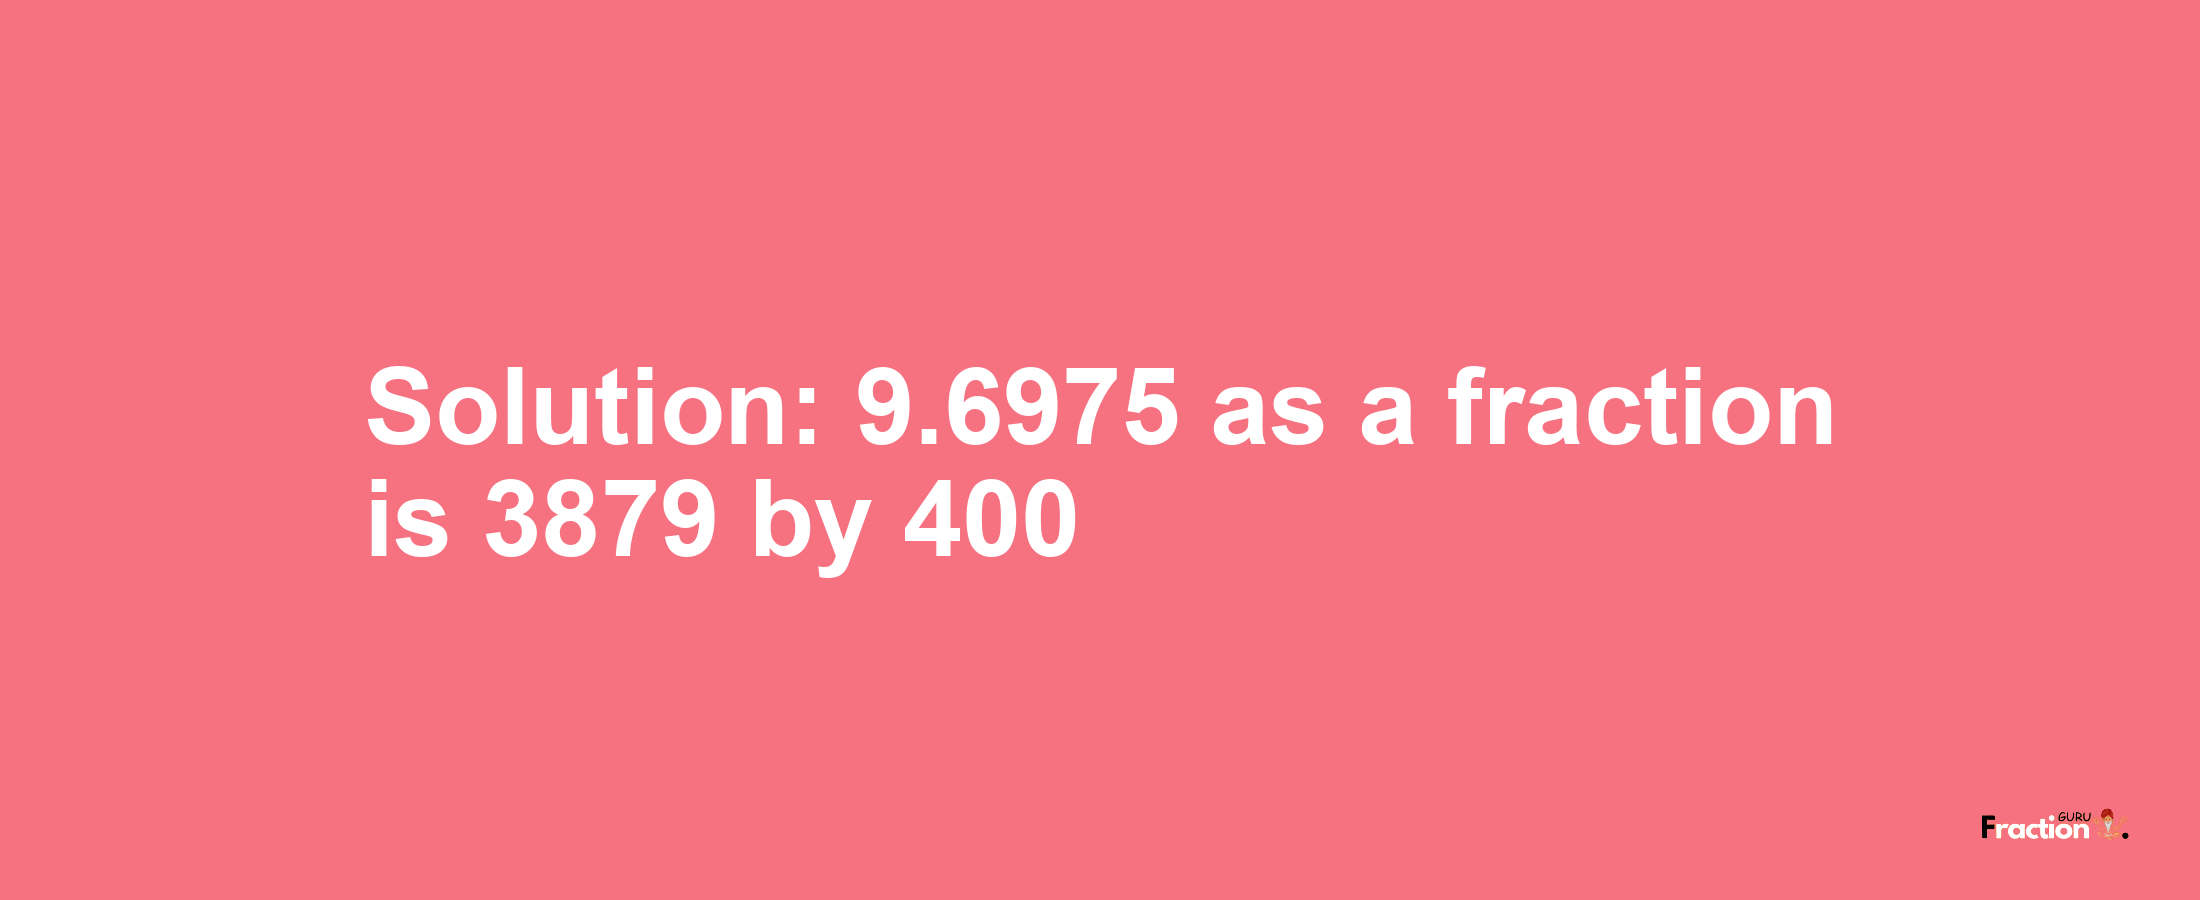 Solution:9.6975 as a fraction is 3879/400